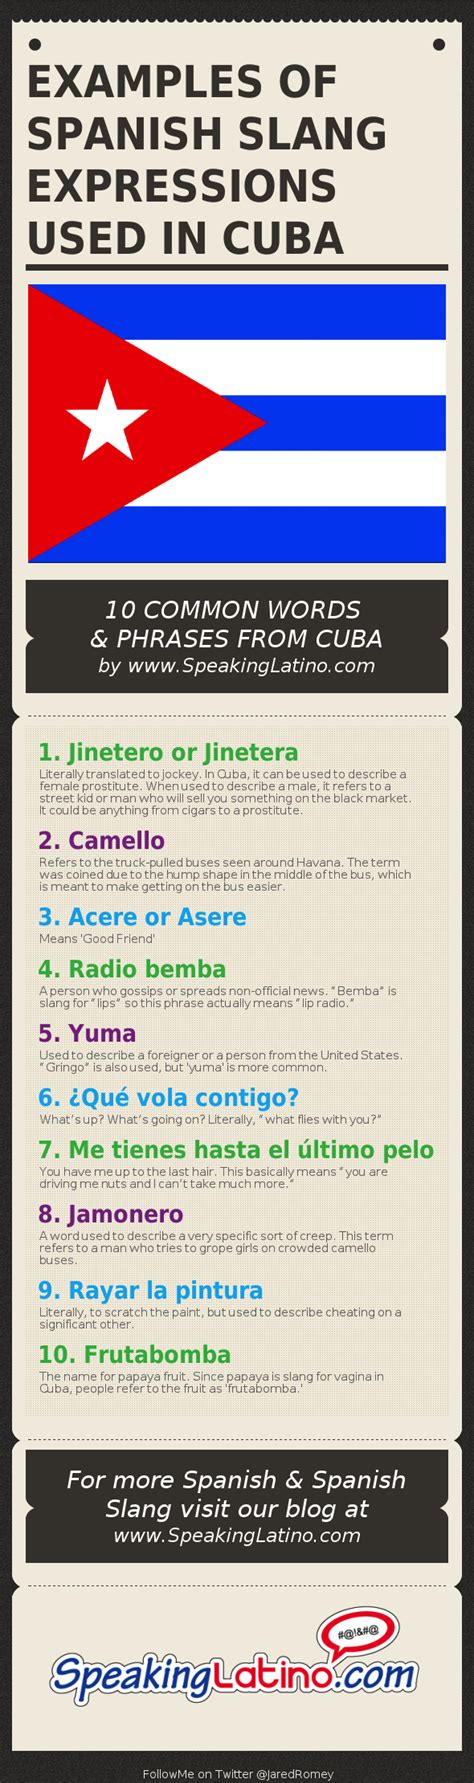 30 Great Spanish And Spanish Slang Articles From 2013